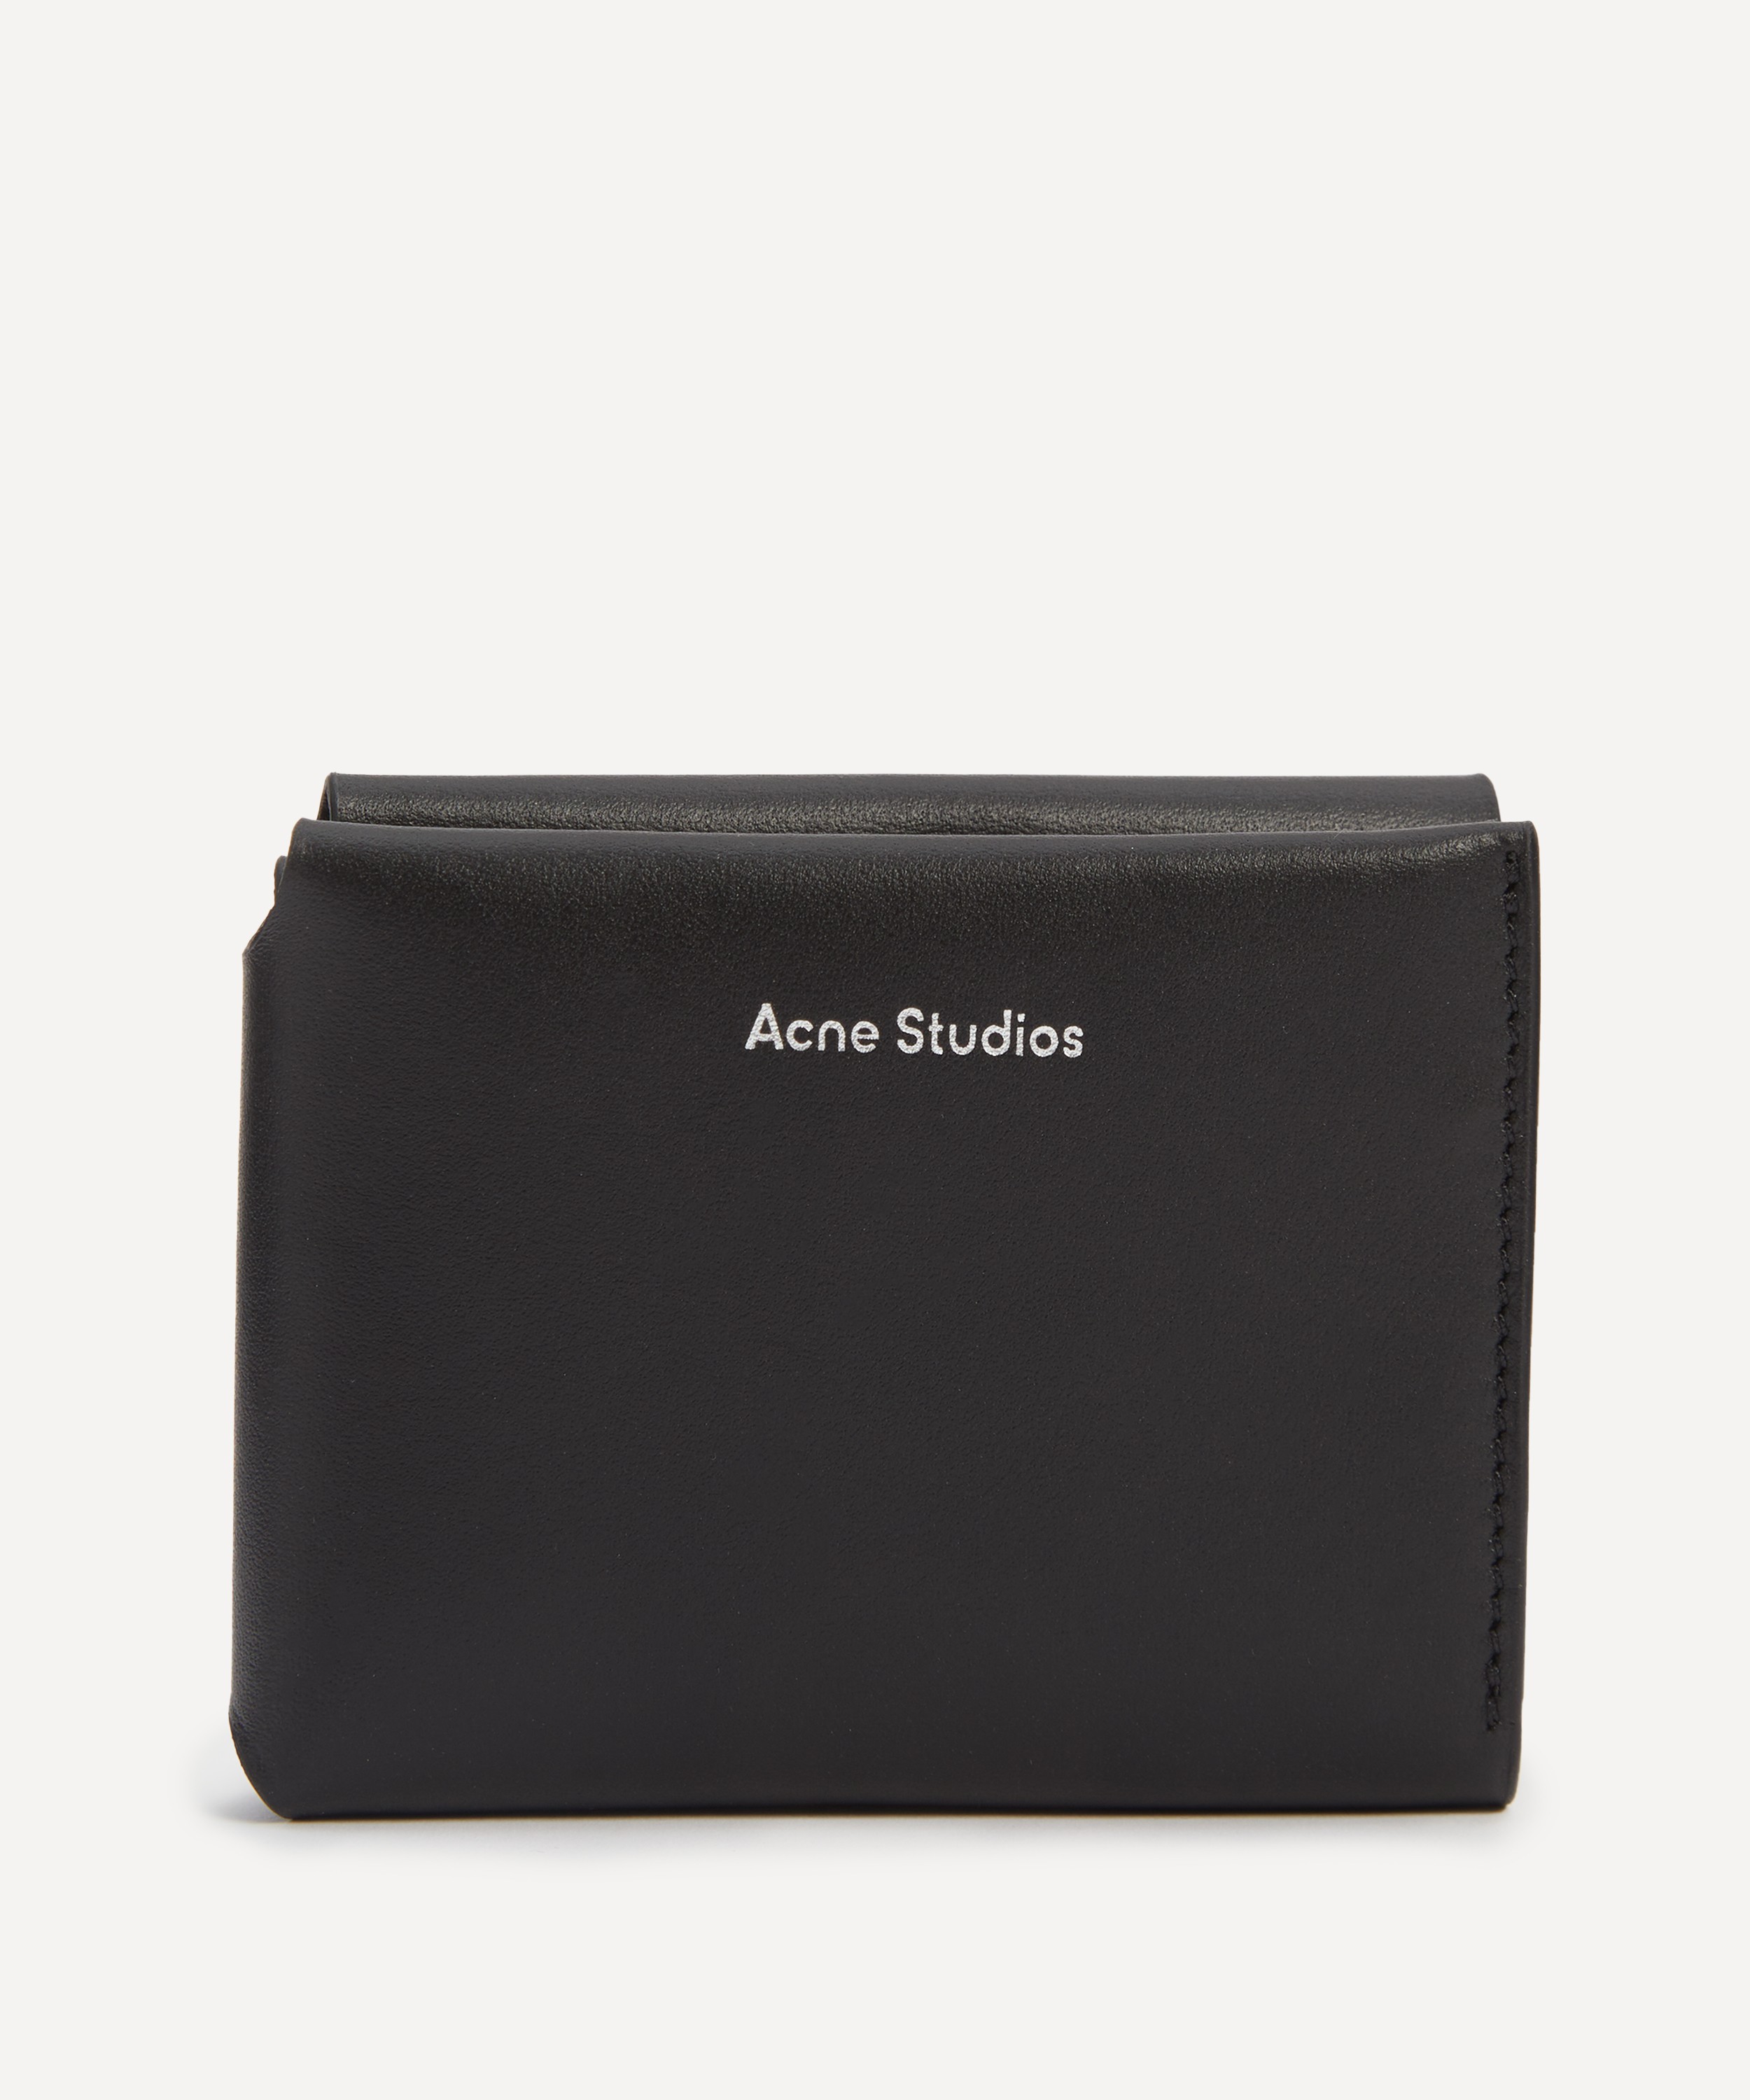 Acne Studios - Trifold Leather Wallet